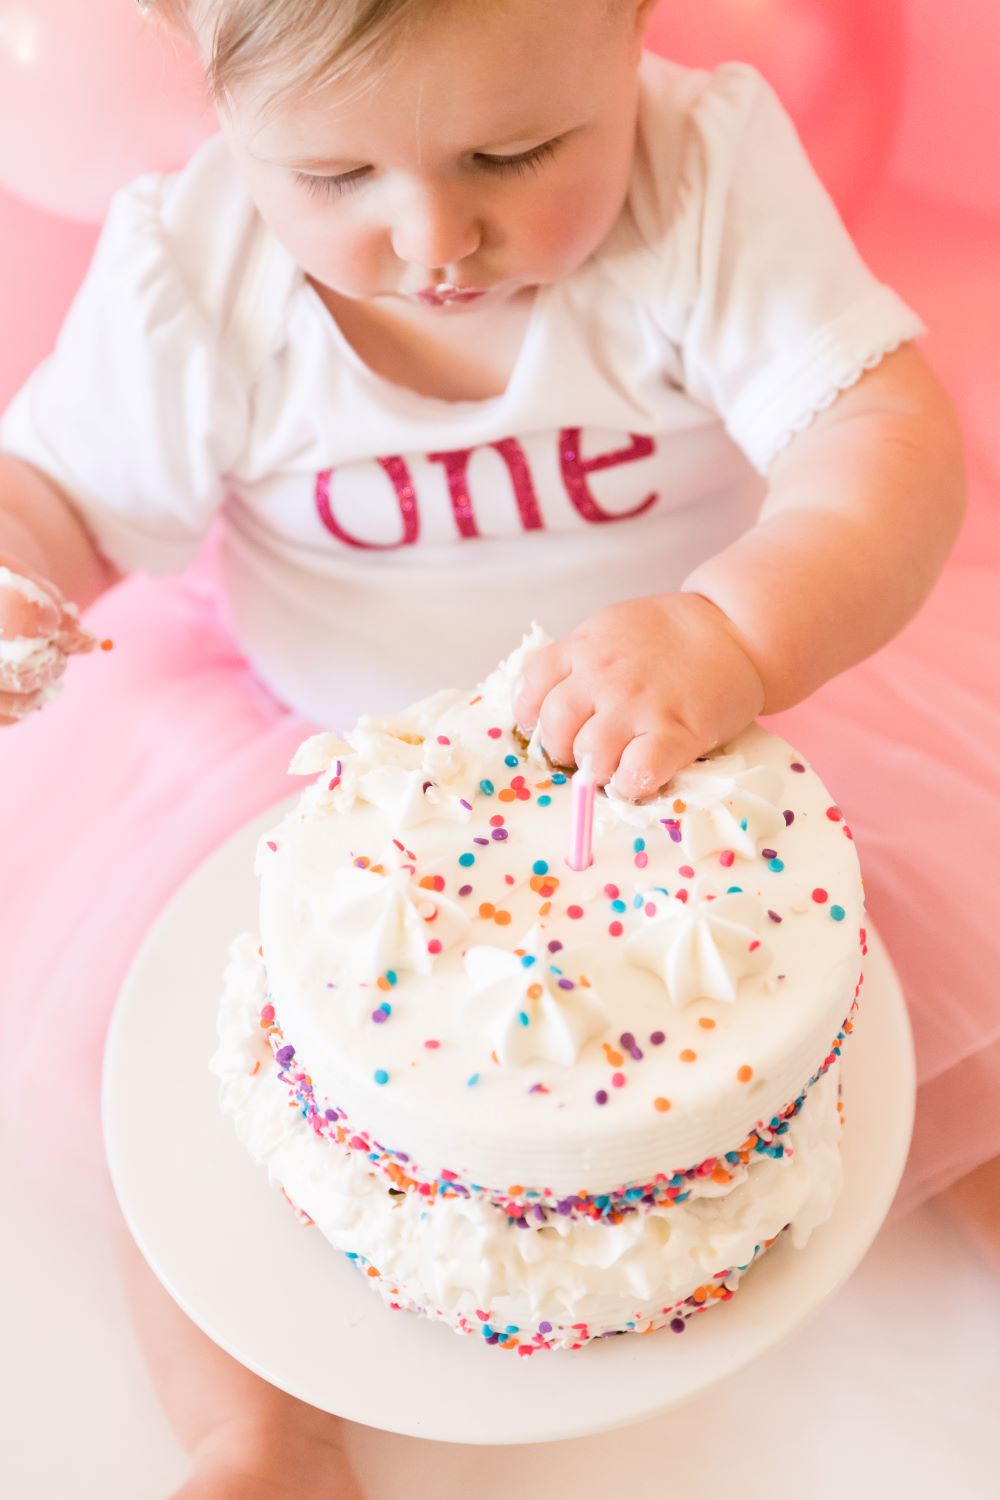 1-year old milestones and key photos to take at each stage